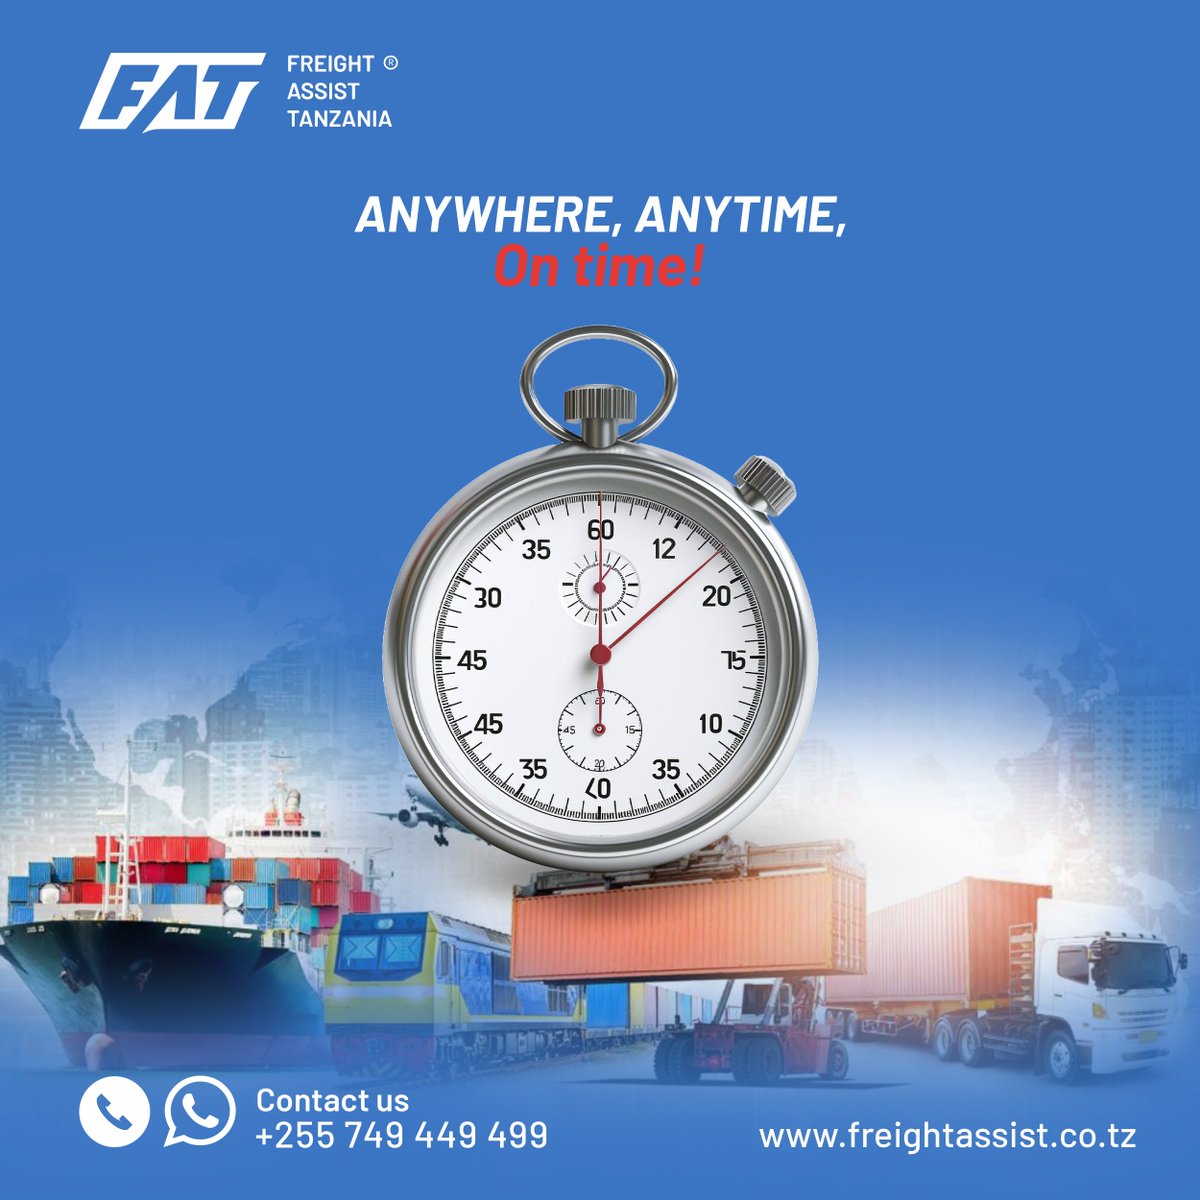 Efficient clearing and forwarding services for your cargo, anywhere, anytime, on time! Contact us at +255 749 449 499 for seamless logistics solutions.

#FreightAssistTanzania #CustomsClearance #FreightFowarding #Logistics #Warehousing #SupplyChain #shipping  #Export #Import